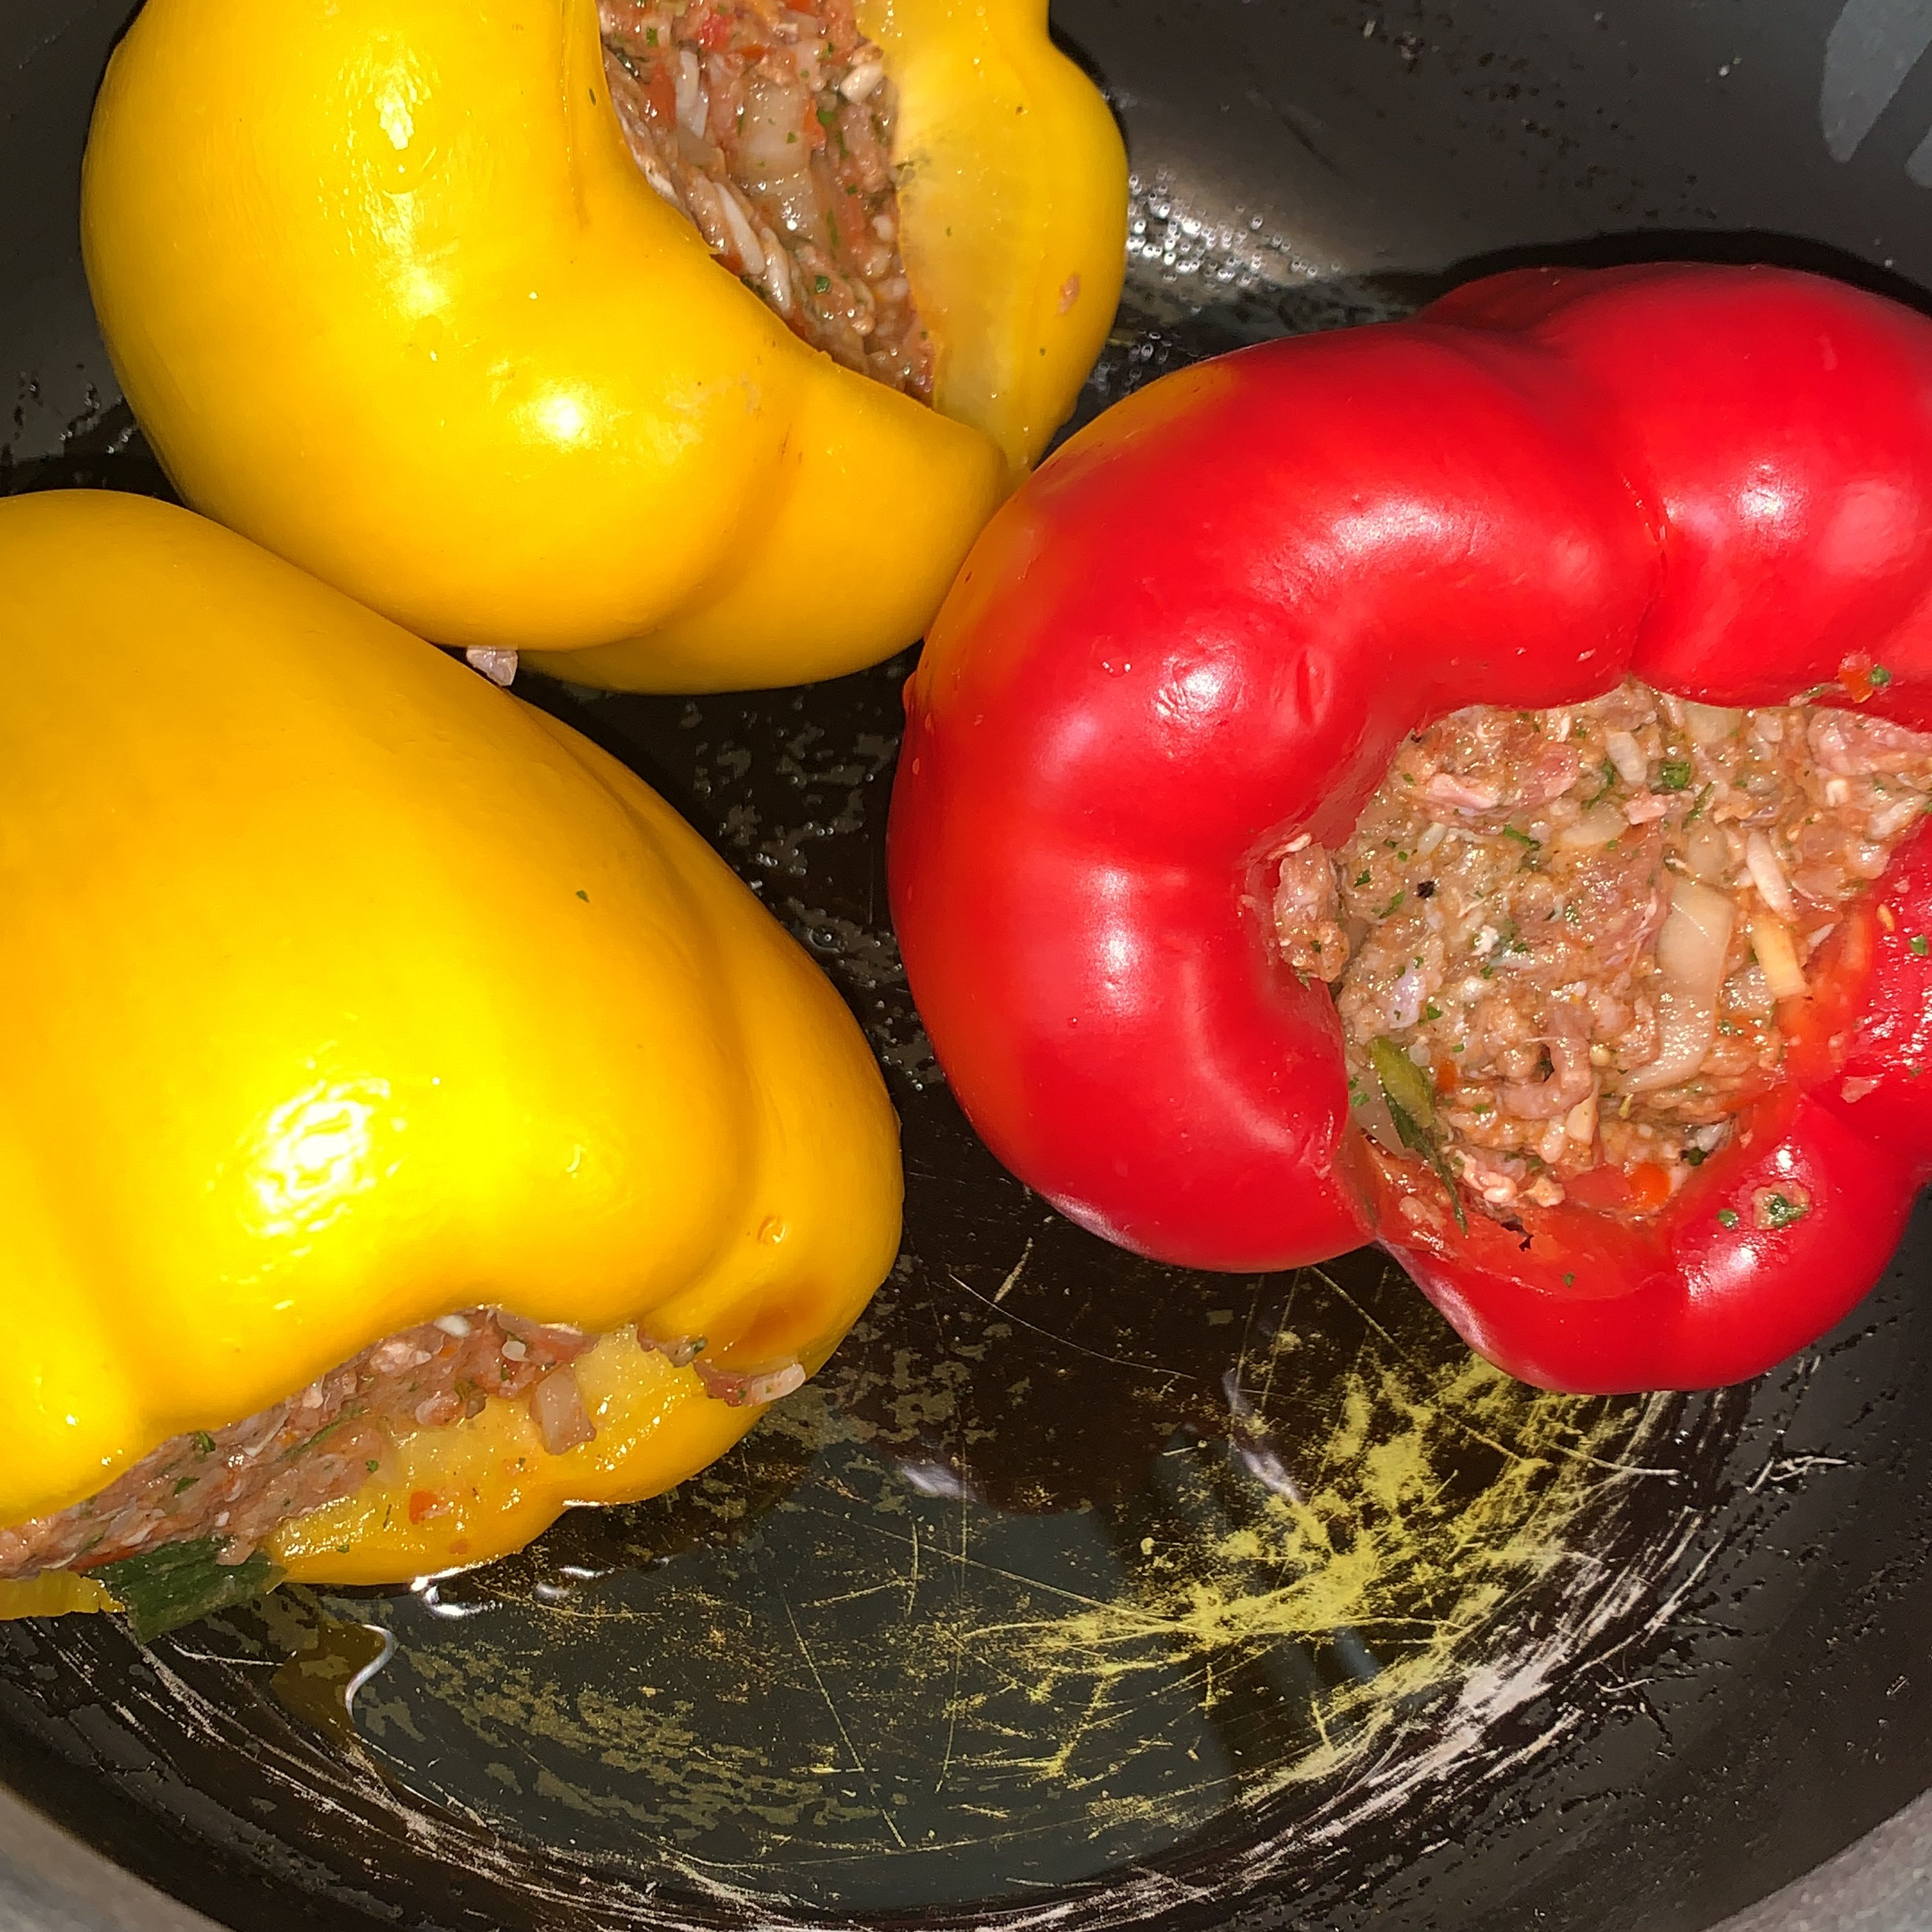 Stuff the bell peppers. Add oil to a pot and turn the heat up to medium high. Add the bell peppers and let them cook for 40 minutes. Flip the peppers halfway through.